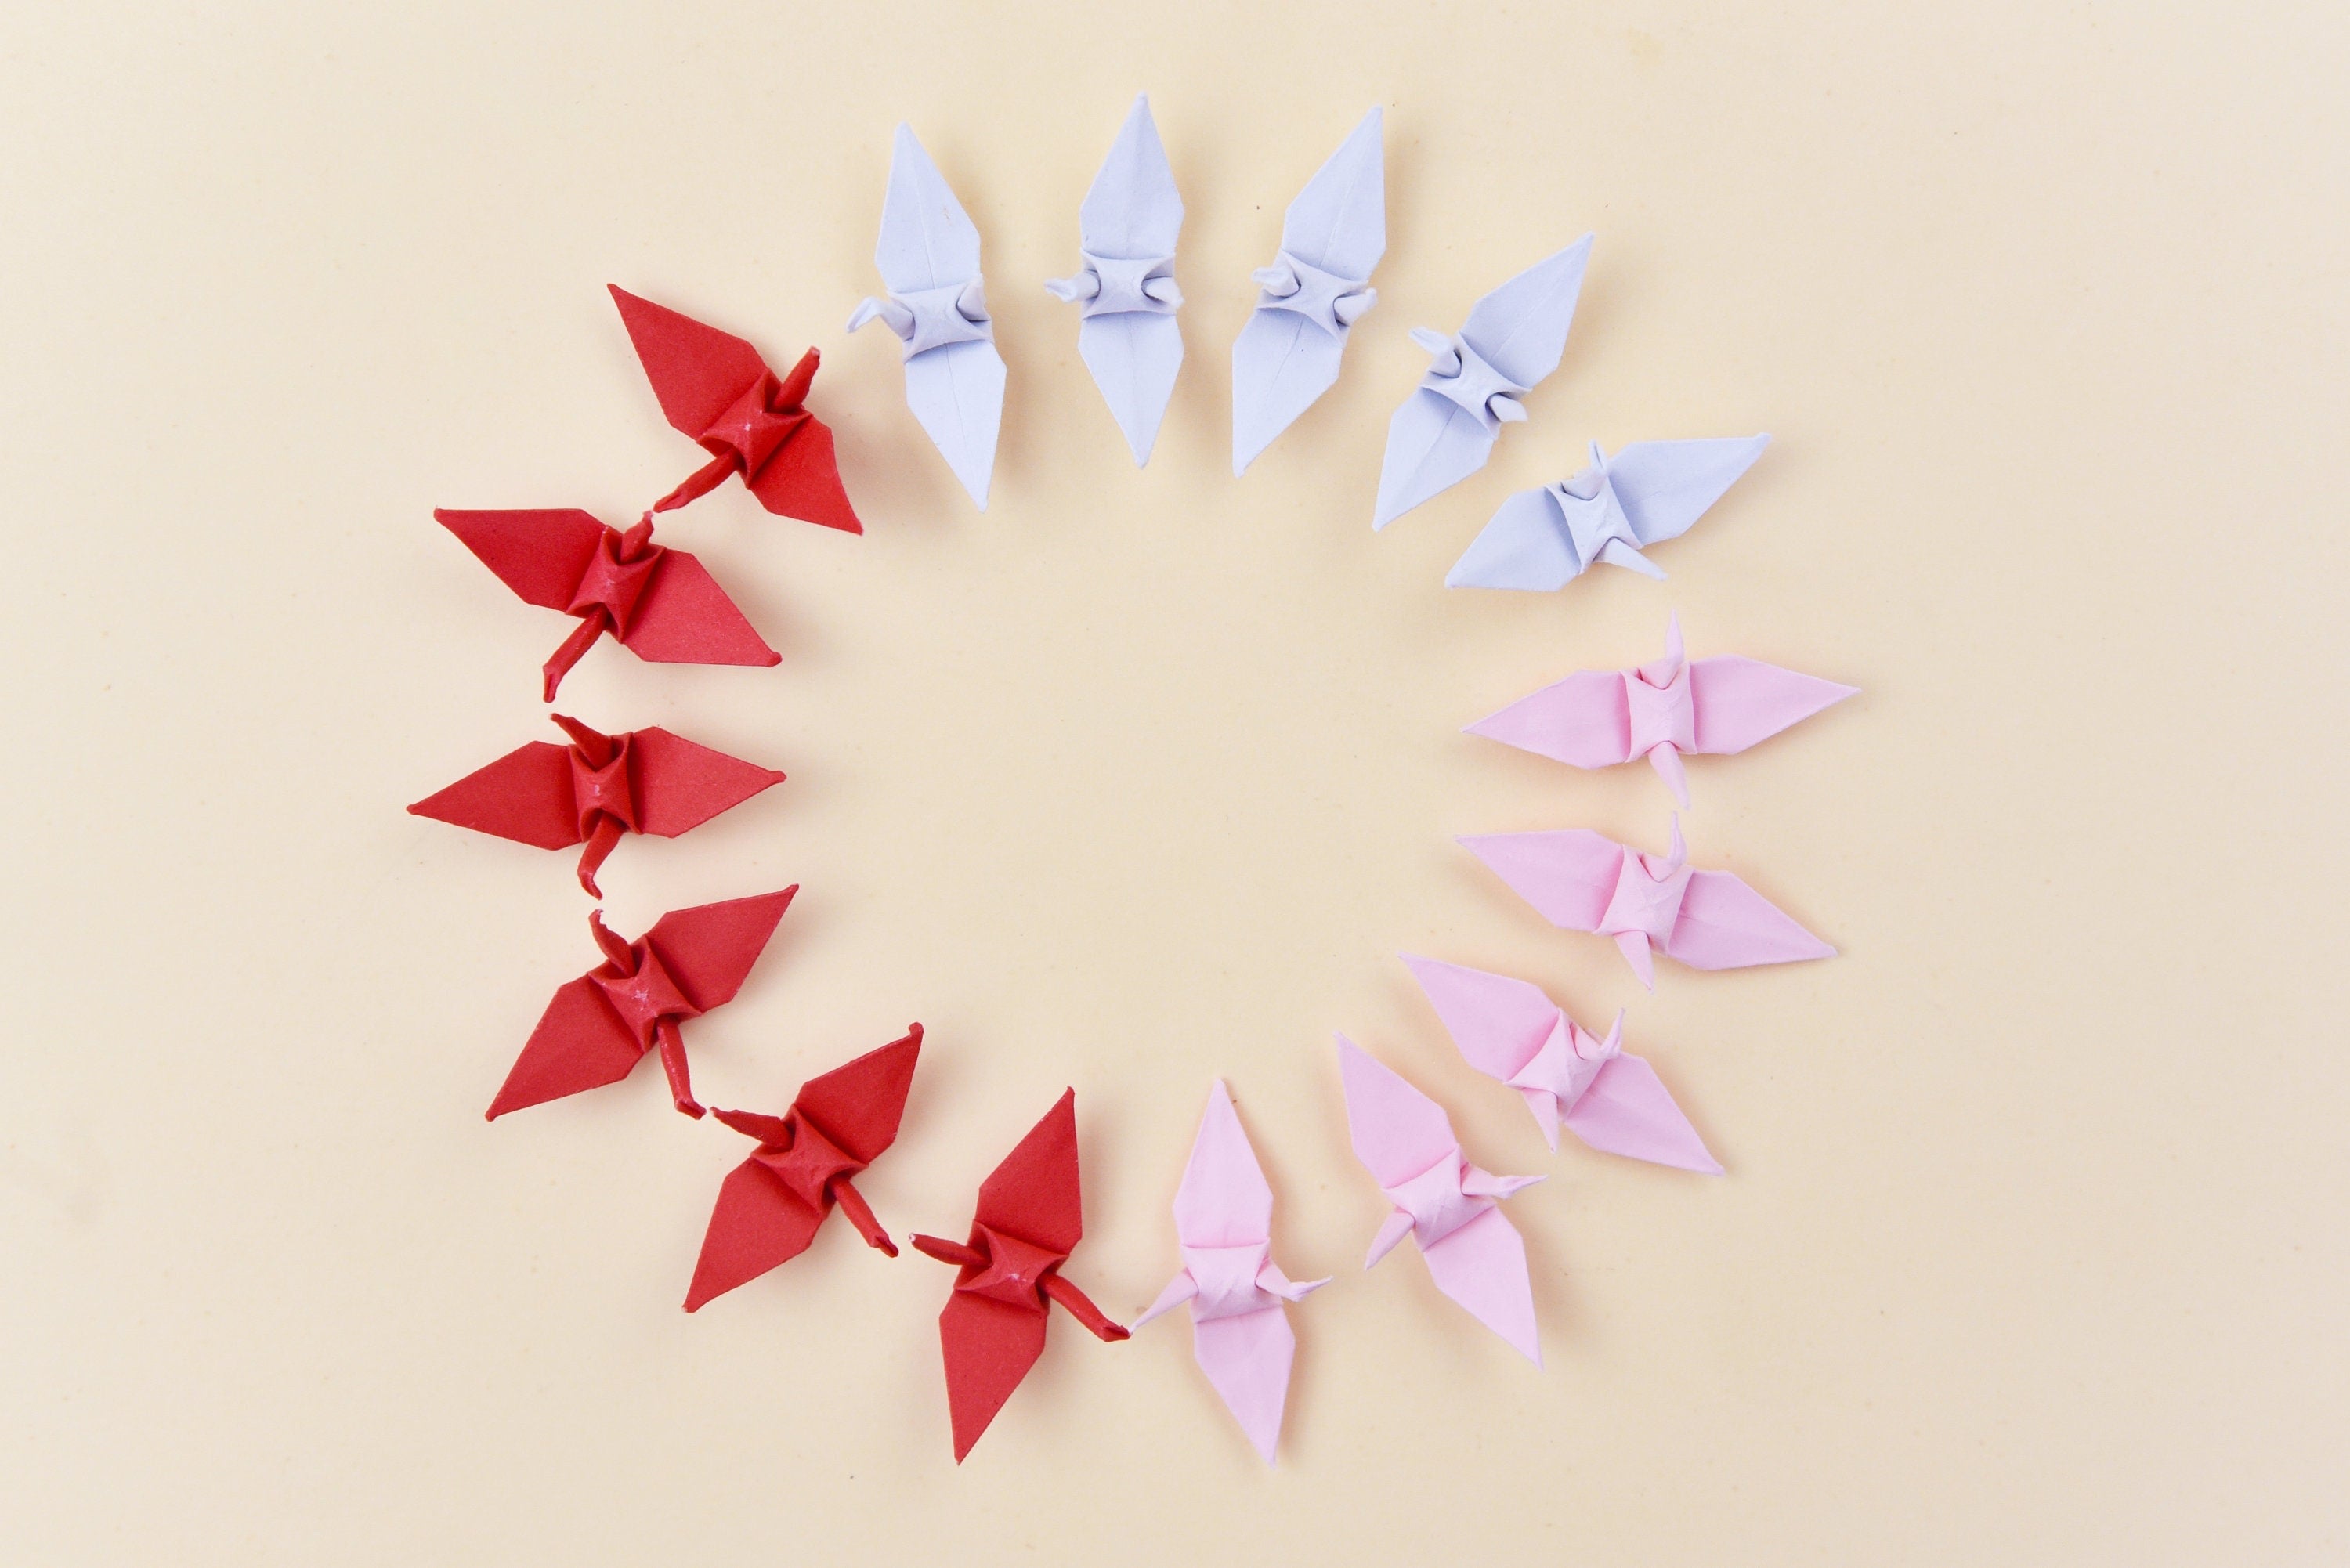 100 Origami Paper Crane Red Pink White Shade Tone Small 3.81 cm (1.5 inches) Origami crane for Wedding Party, Valentine's Gift